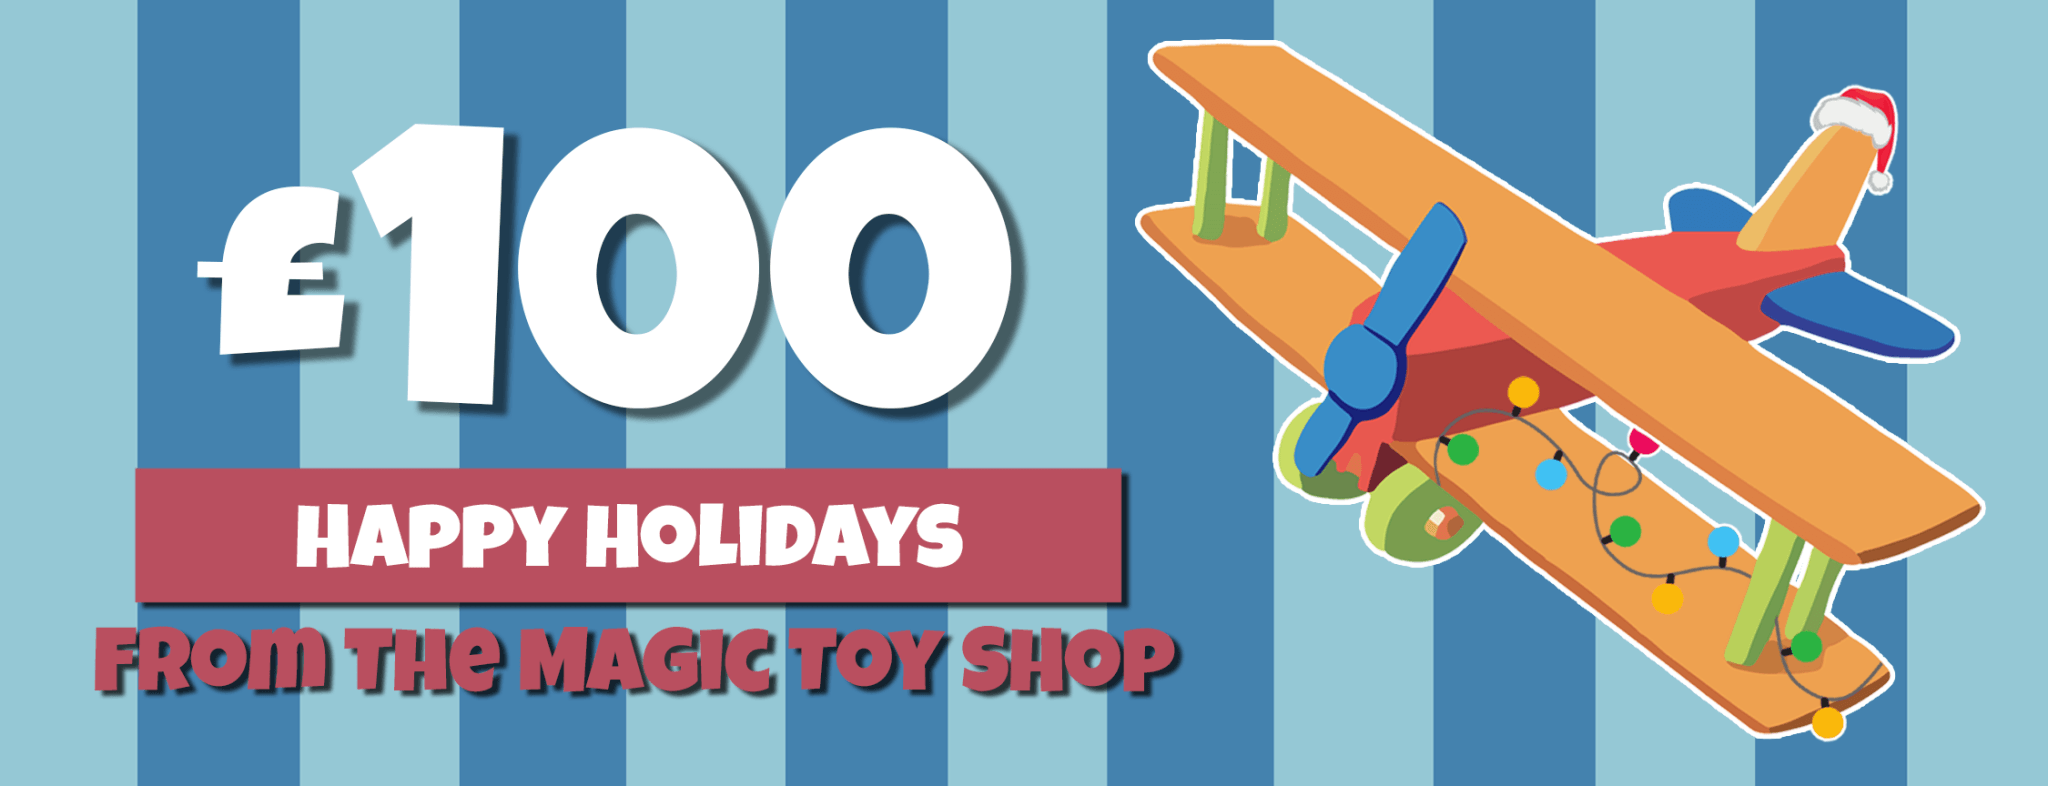 The Magic Toy Shop Holiday Gift Card The Magic Toy Shop - The Magic Toy Shop